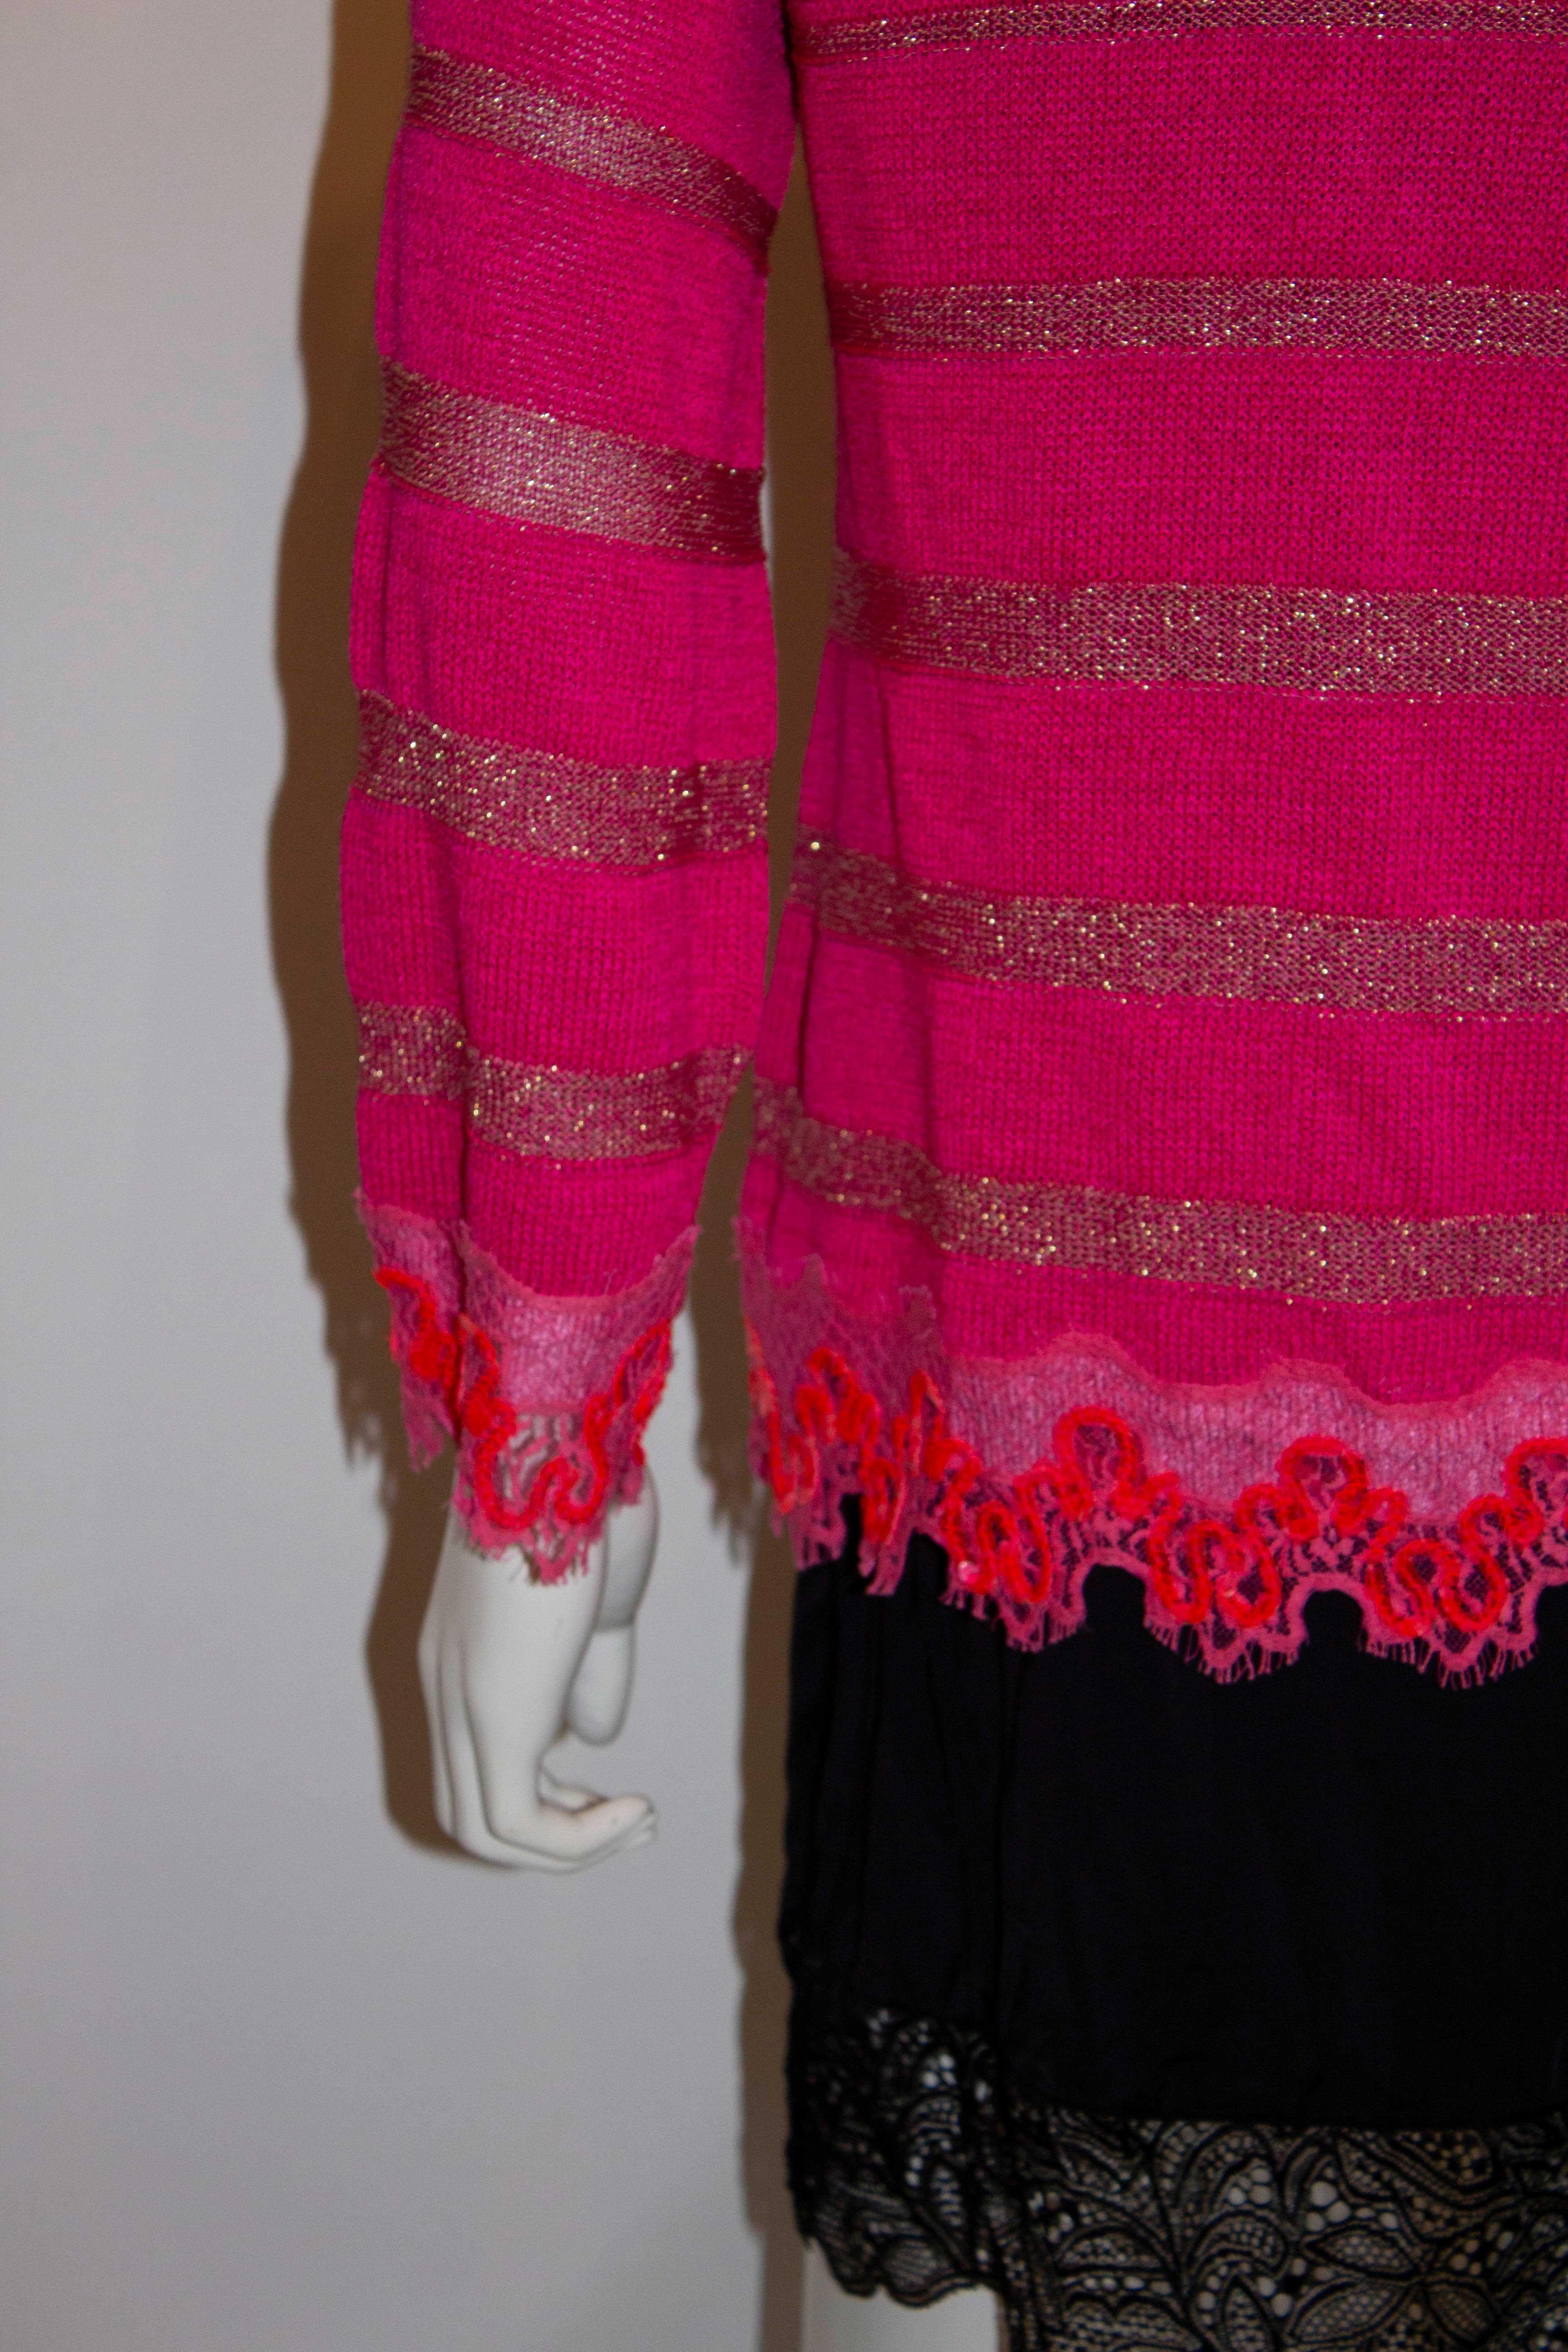 A great twin set to brighten up your Fall outfit. A pretty pink cami and  cardigan by Christian Lacroiz, Bazzar  line. The cami fits a bust up to 38'', length 27'' and has great crochet detail. The cardigan has a round neckline with a seven button